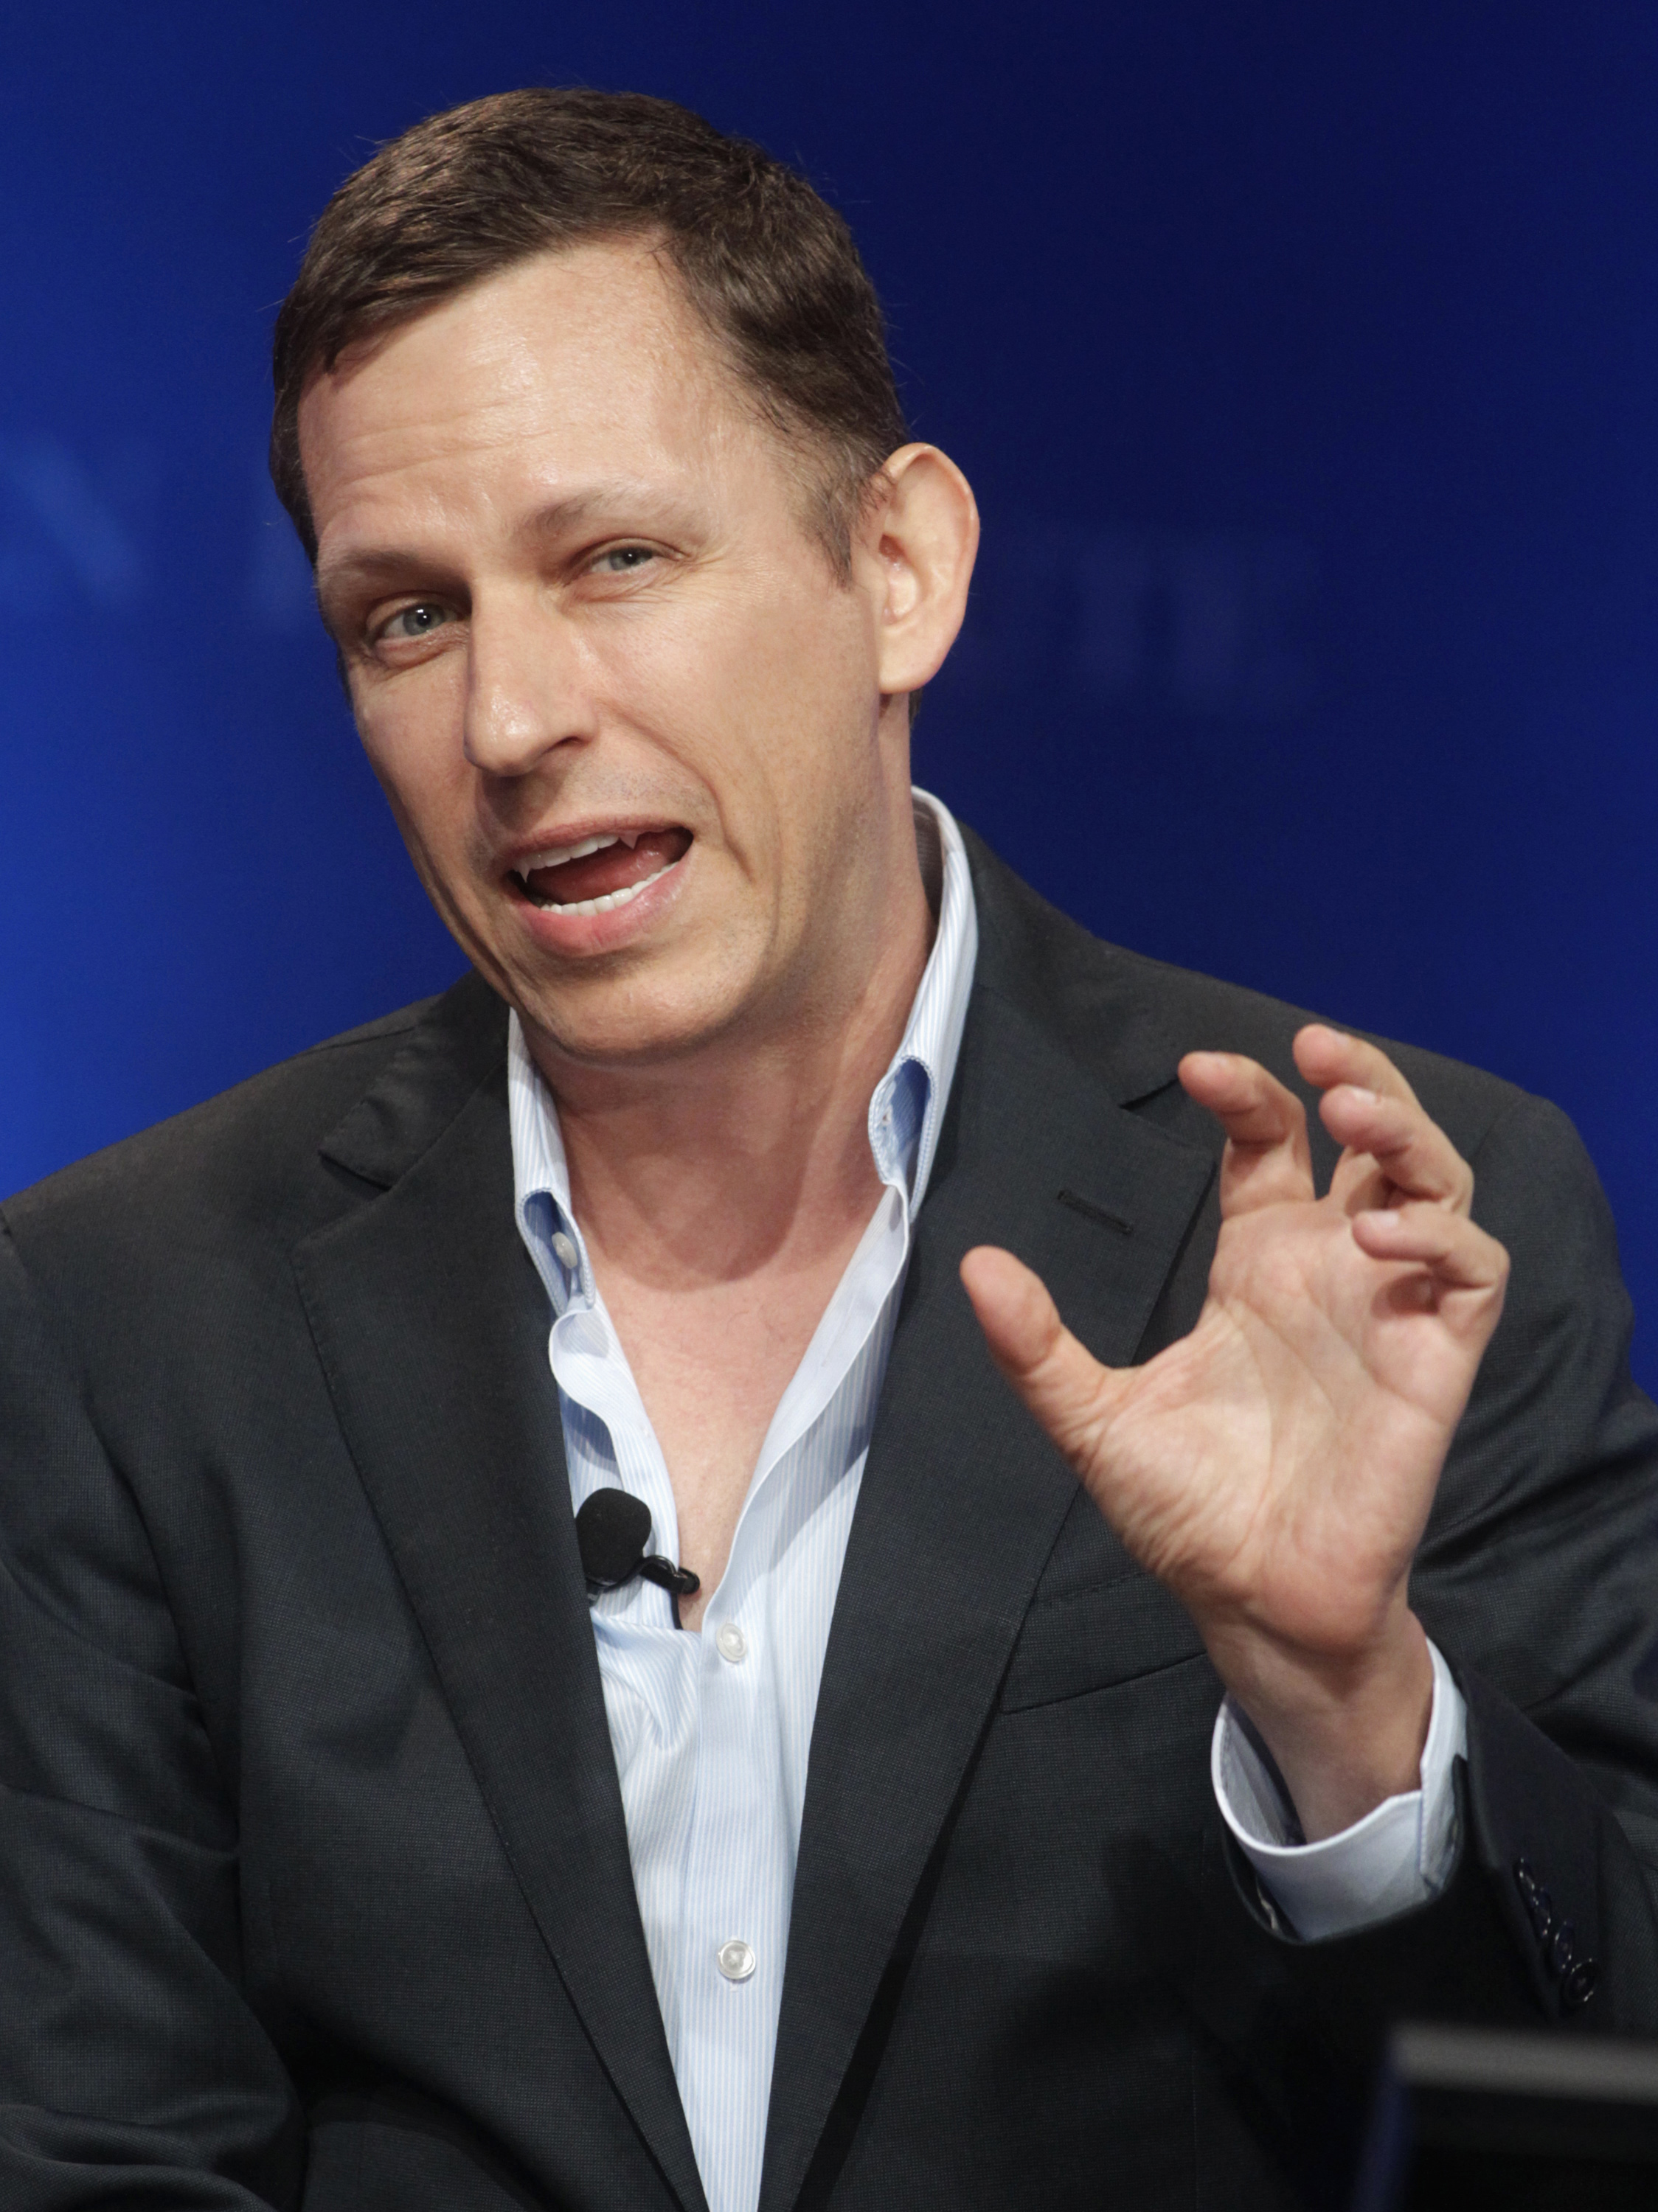 Peter Thiel is chasing youth in a curious way.